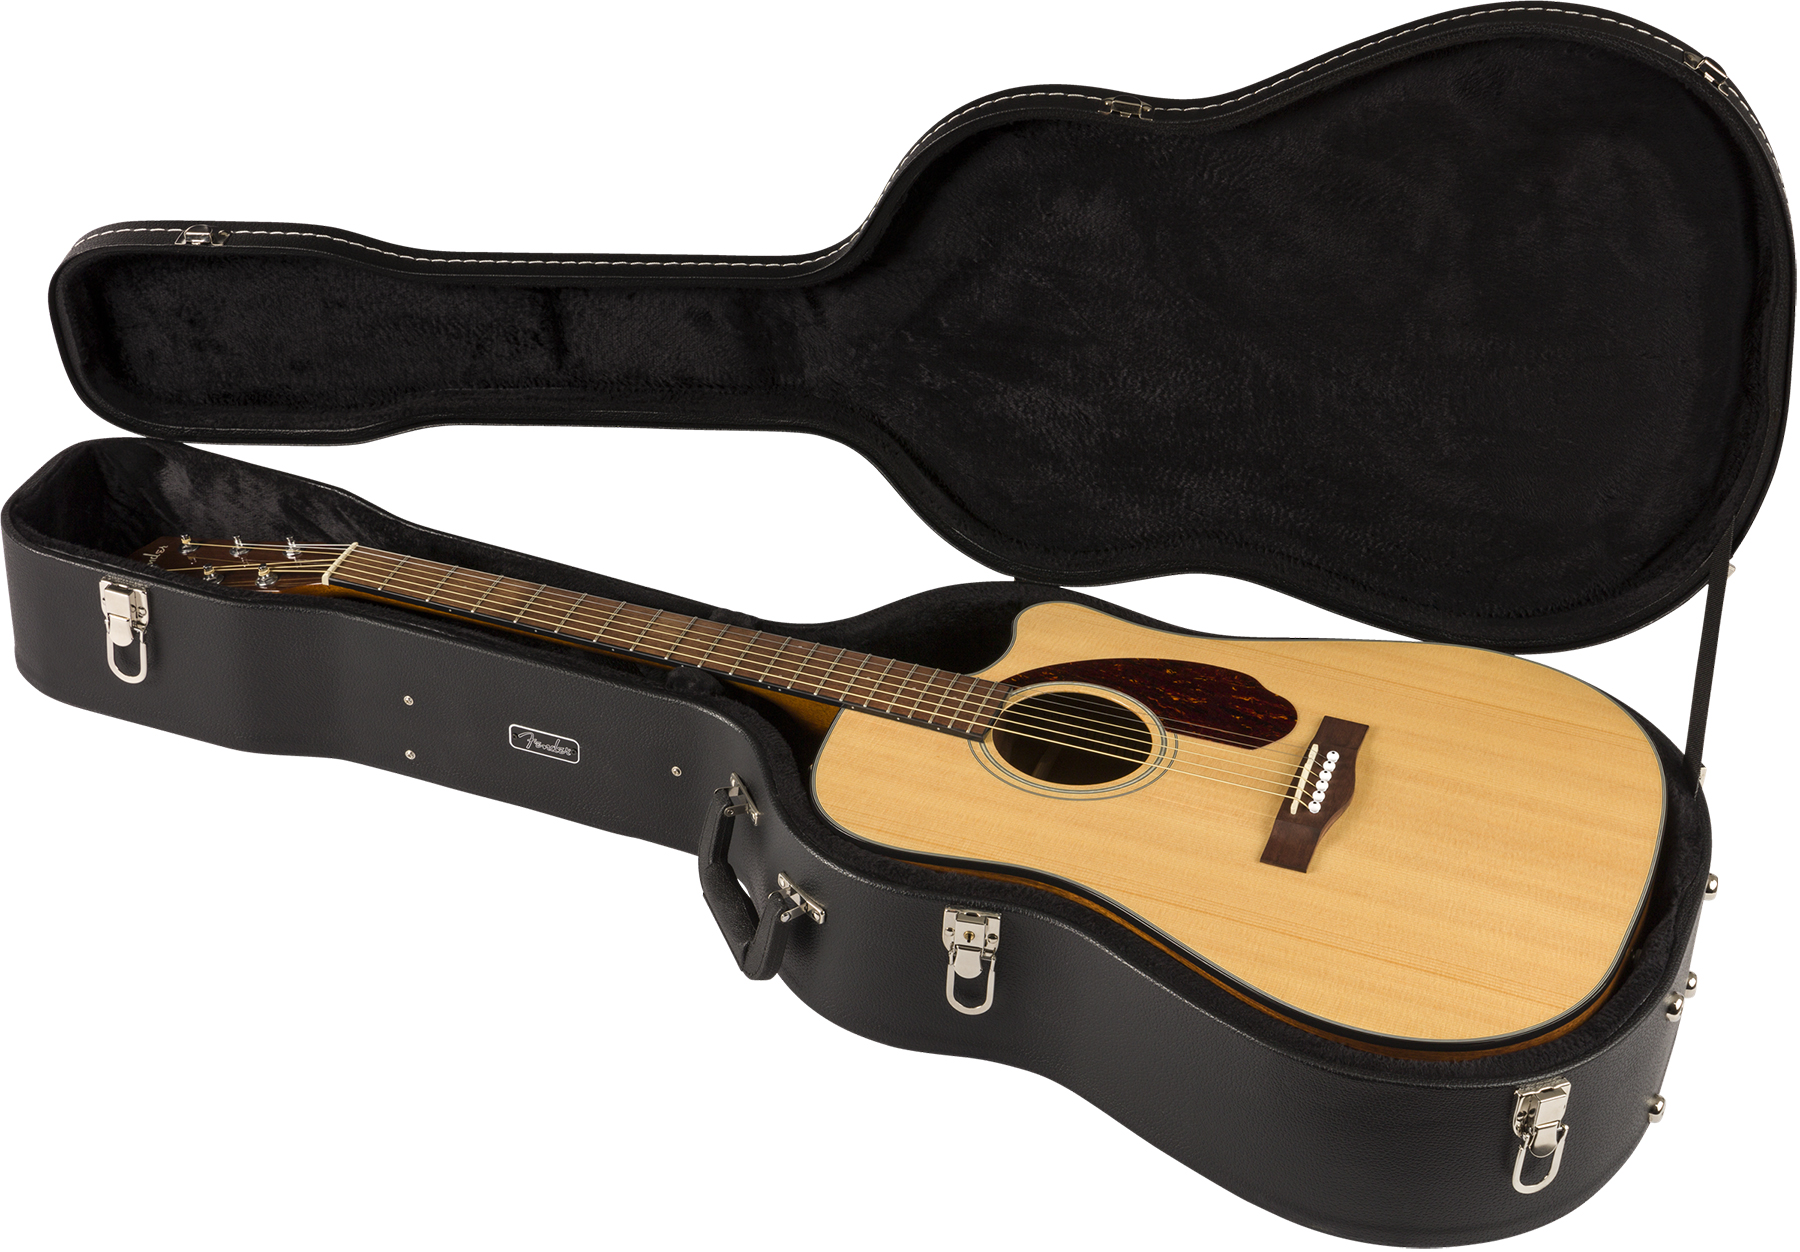 Fender Cd-140sce Classic Design Dreadnought Cw Epicea Ovangkol Wal +etui - Natural - Electro acoustic guitar - Variation 5